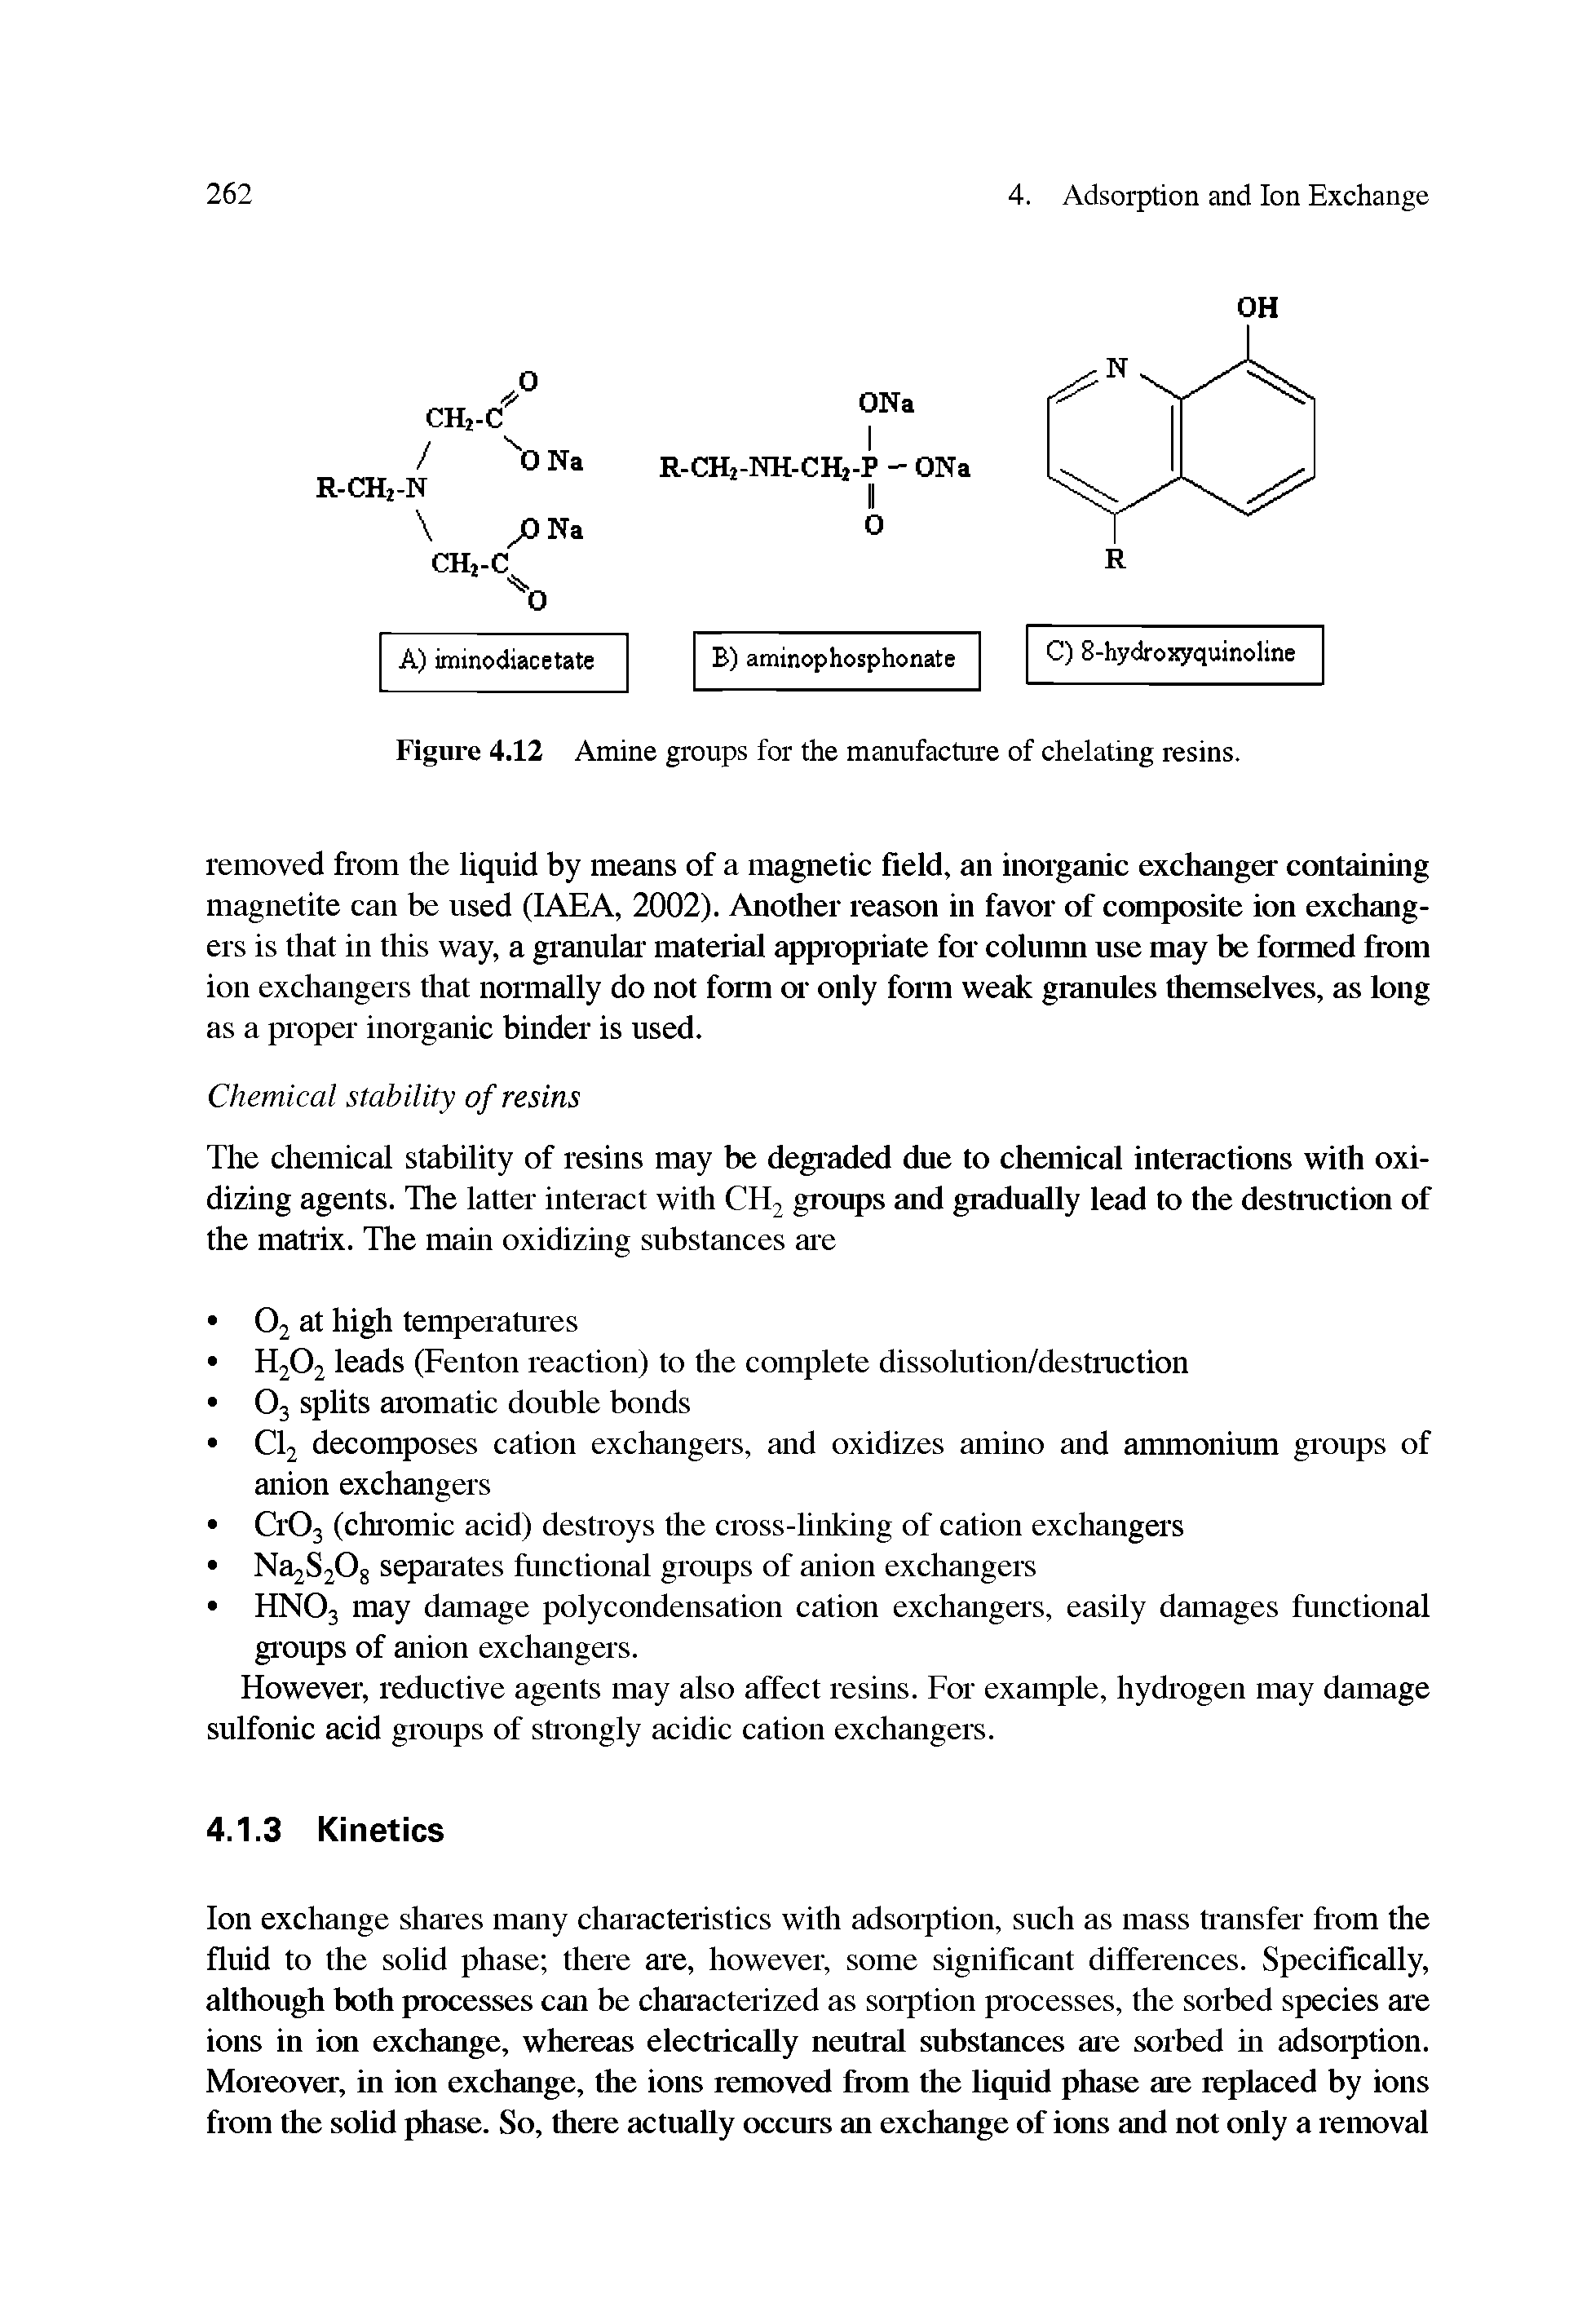 Figure 4.12 Amine groups for the manufacture of chelating resins.